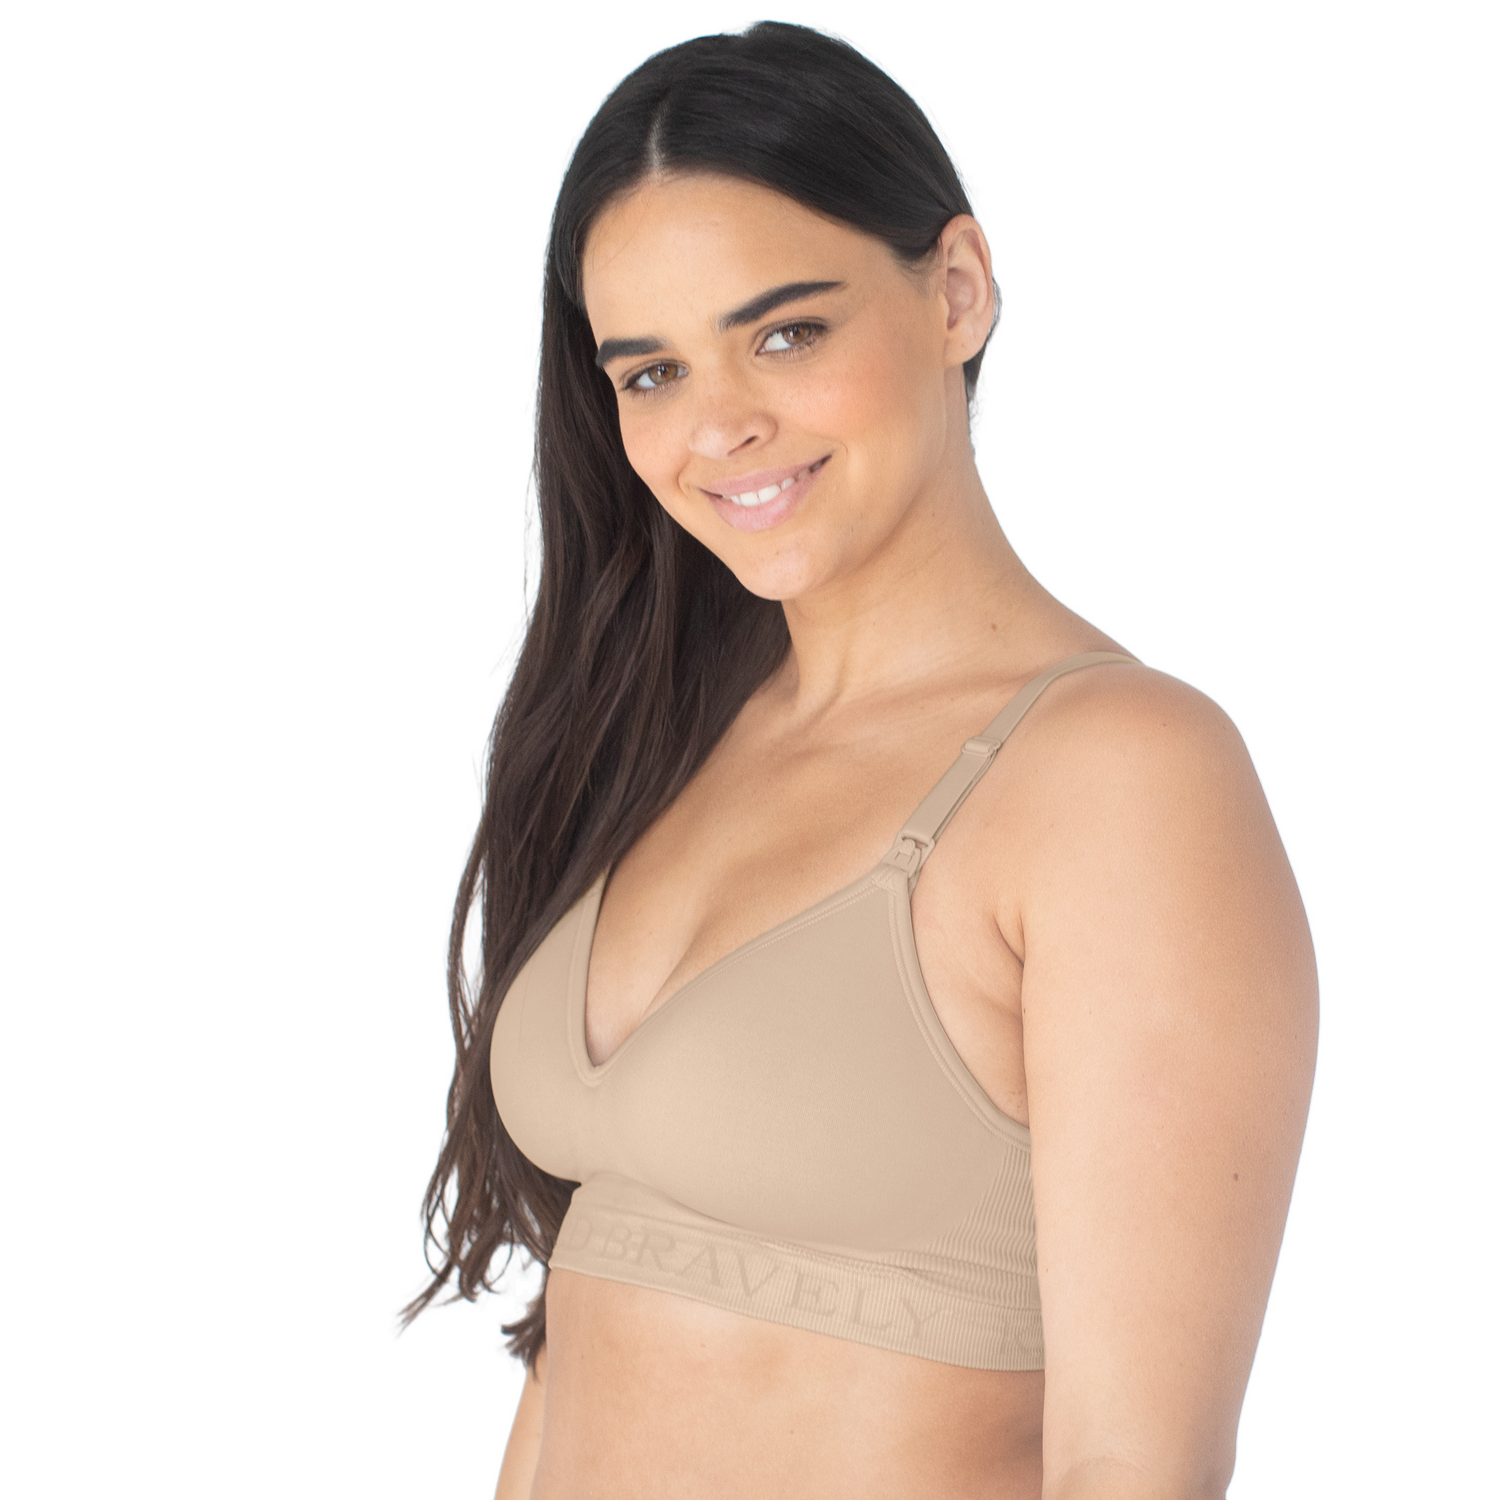 Hatch Collection The Essential Pumping Bra - Black, L